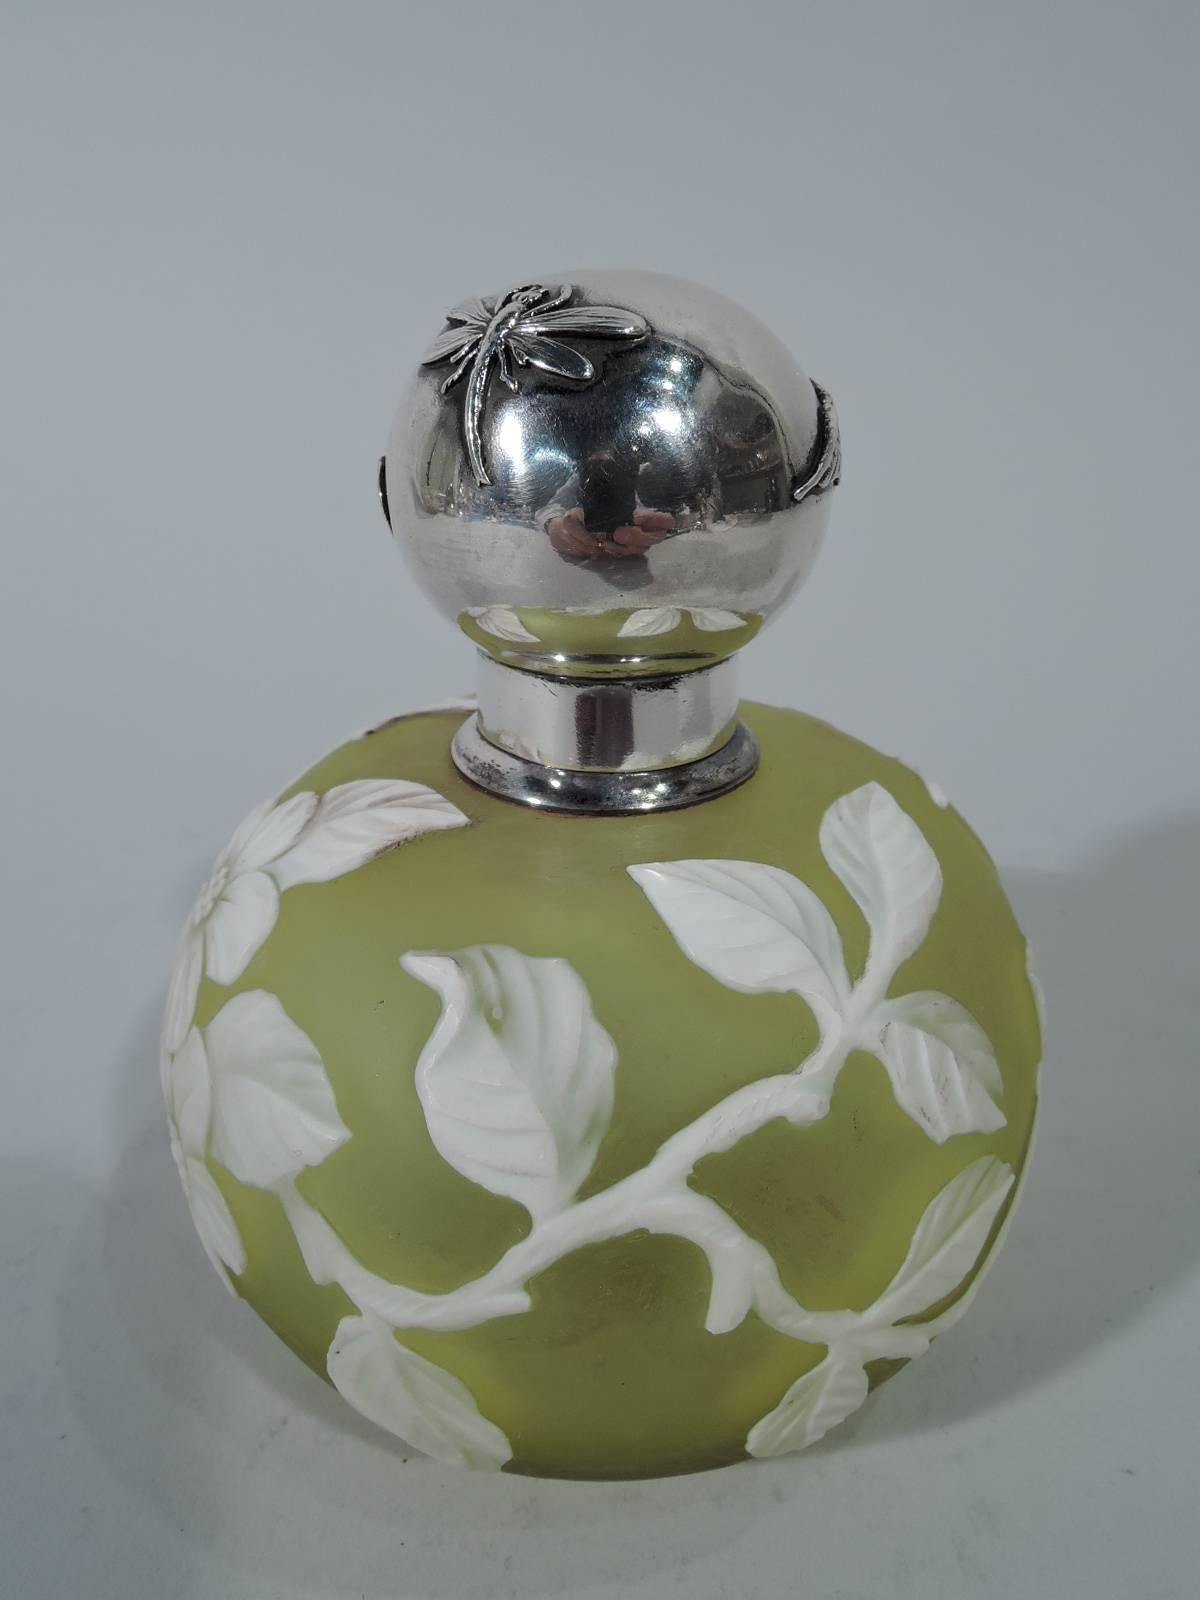 English cameo glass perfume with American sterling silver collar and cover. Globular with white blossoming branch on matte yellow ground. Threaded ball cover with applied Japonesque ornament: dragonfly, bamboo, and owl. Hallmarked Shiebler, a